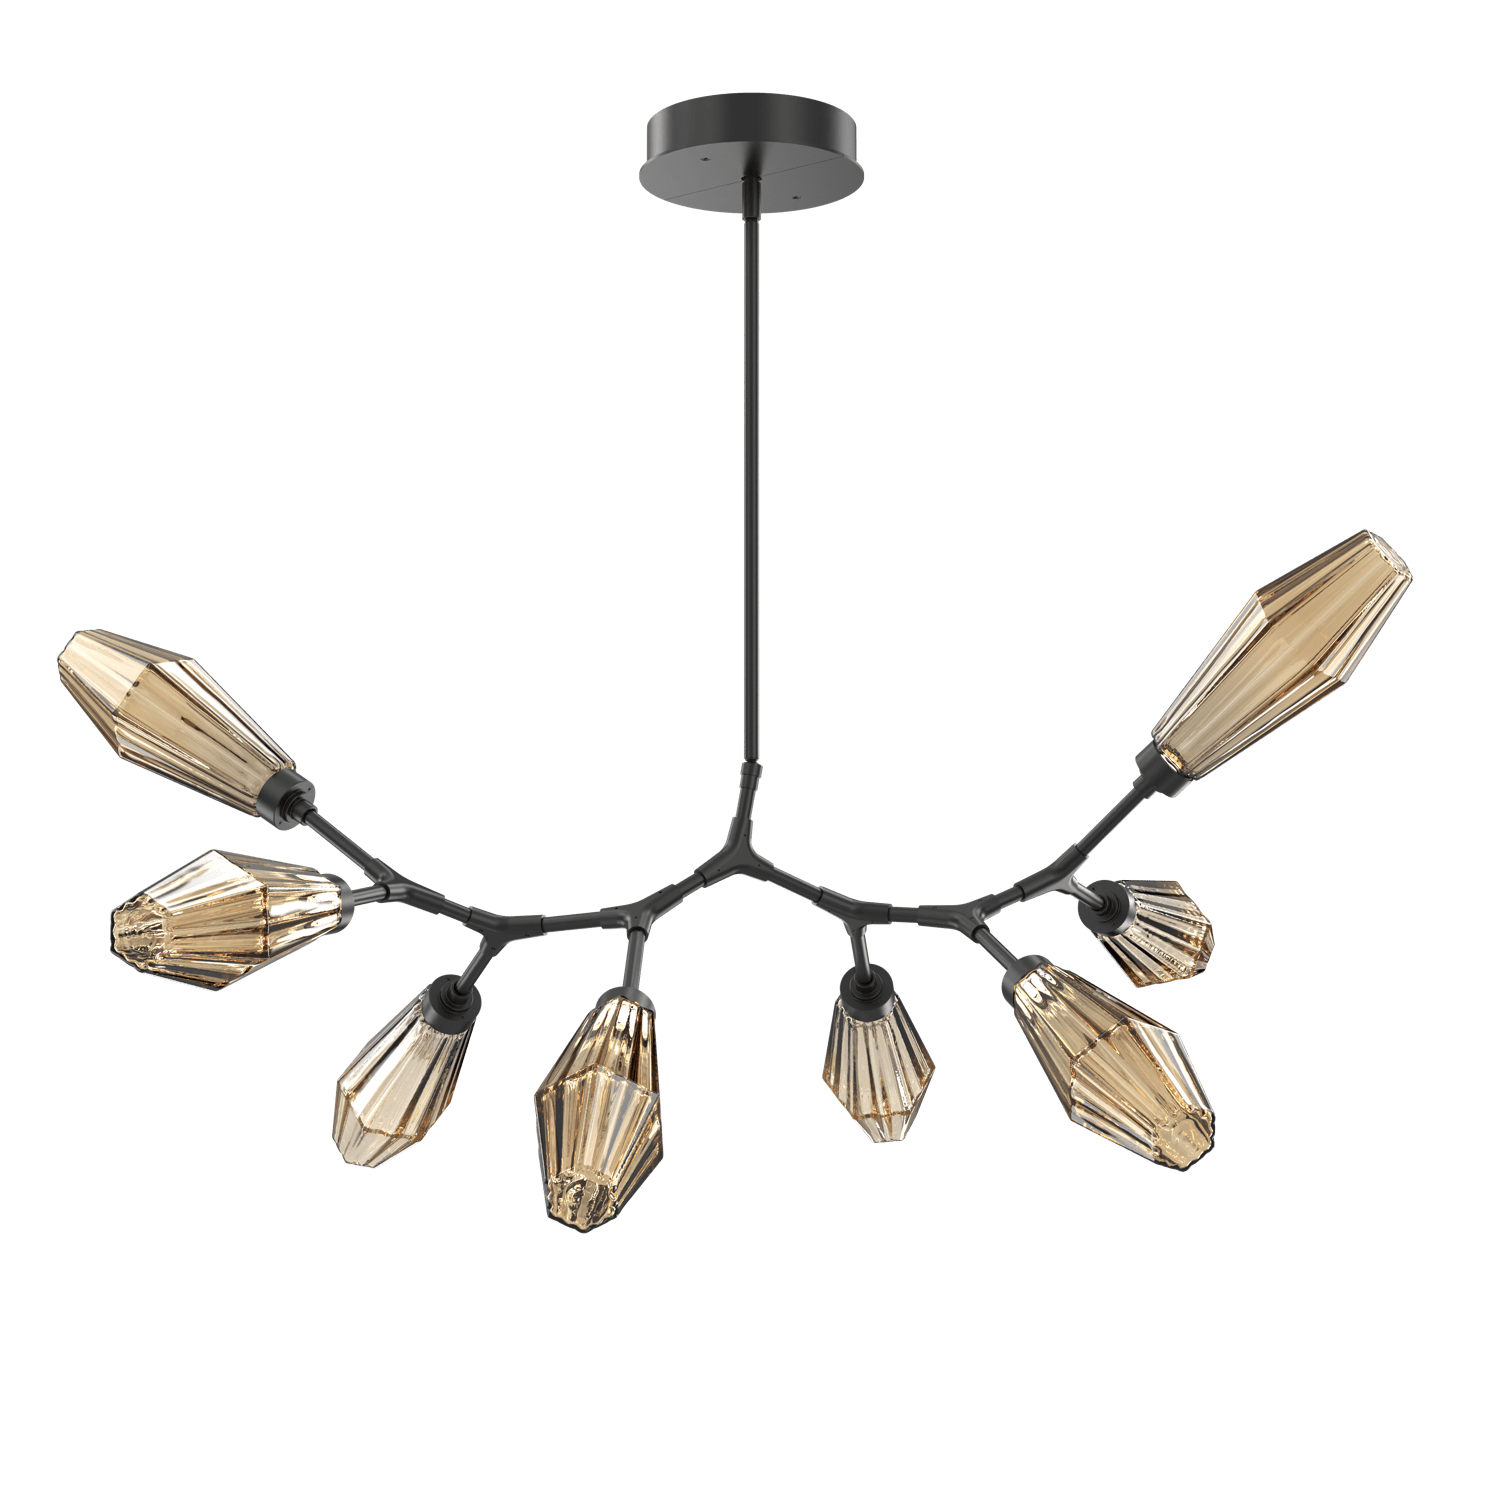 PLB0049-BB-MB-RB-Hammerton-Studio-Aalto-8-light-modern-branch-chandelier-with-matte-black-finish-and-optic-ribbed-bronze-glass-shades-and-LED-lamping